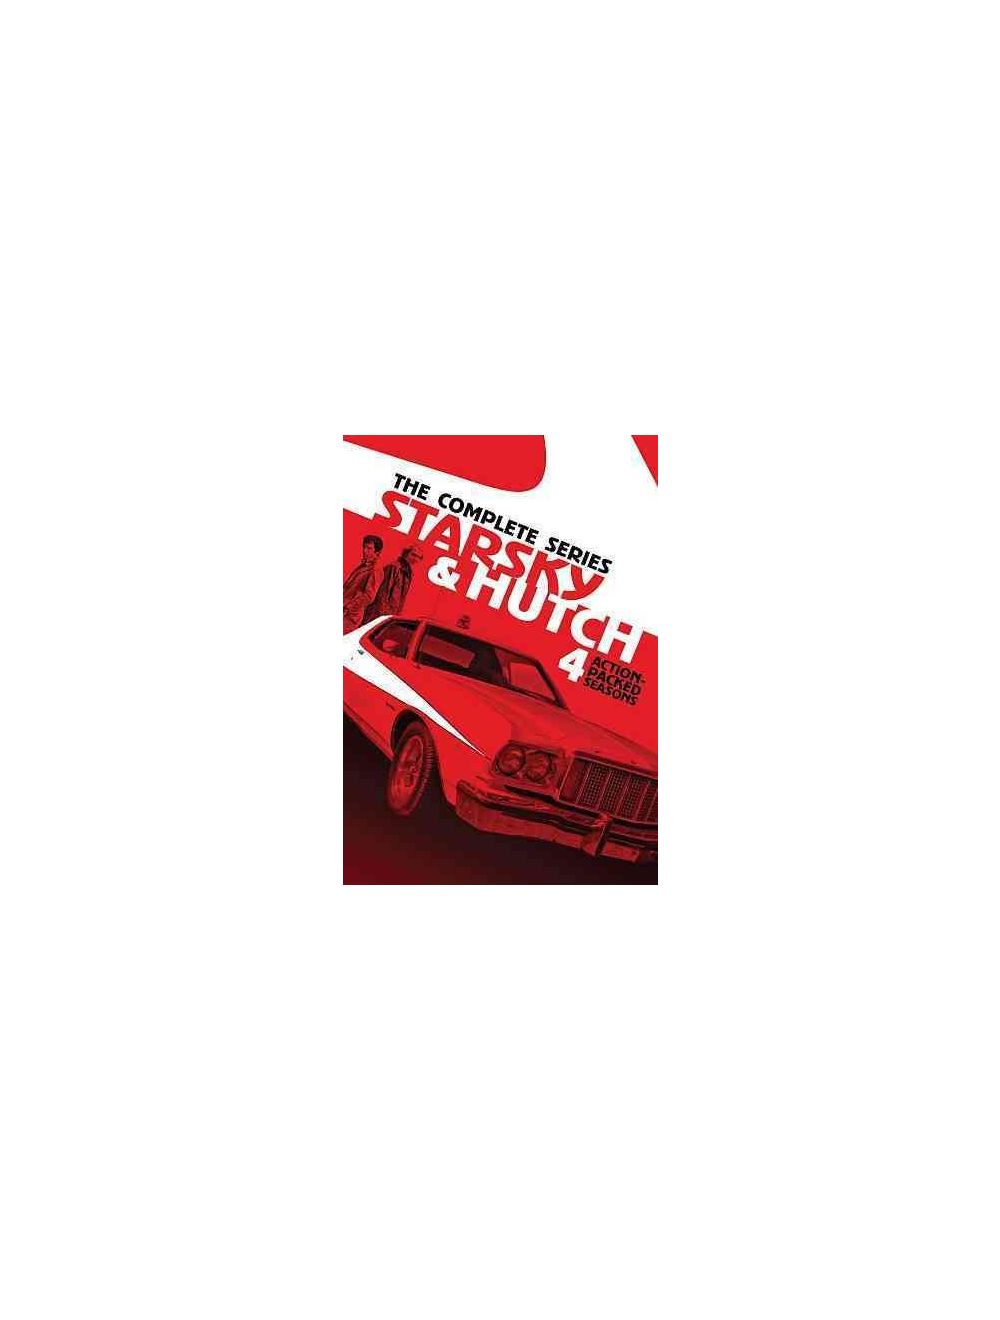 STARSKY & HUTCH: THE COMPLETE SERIES DVD